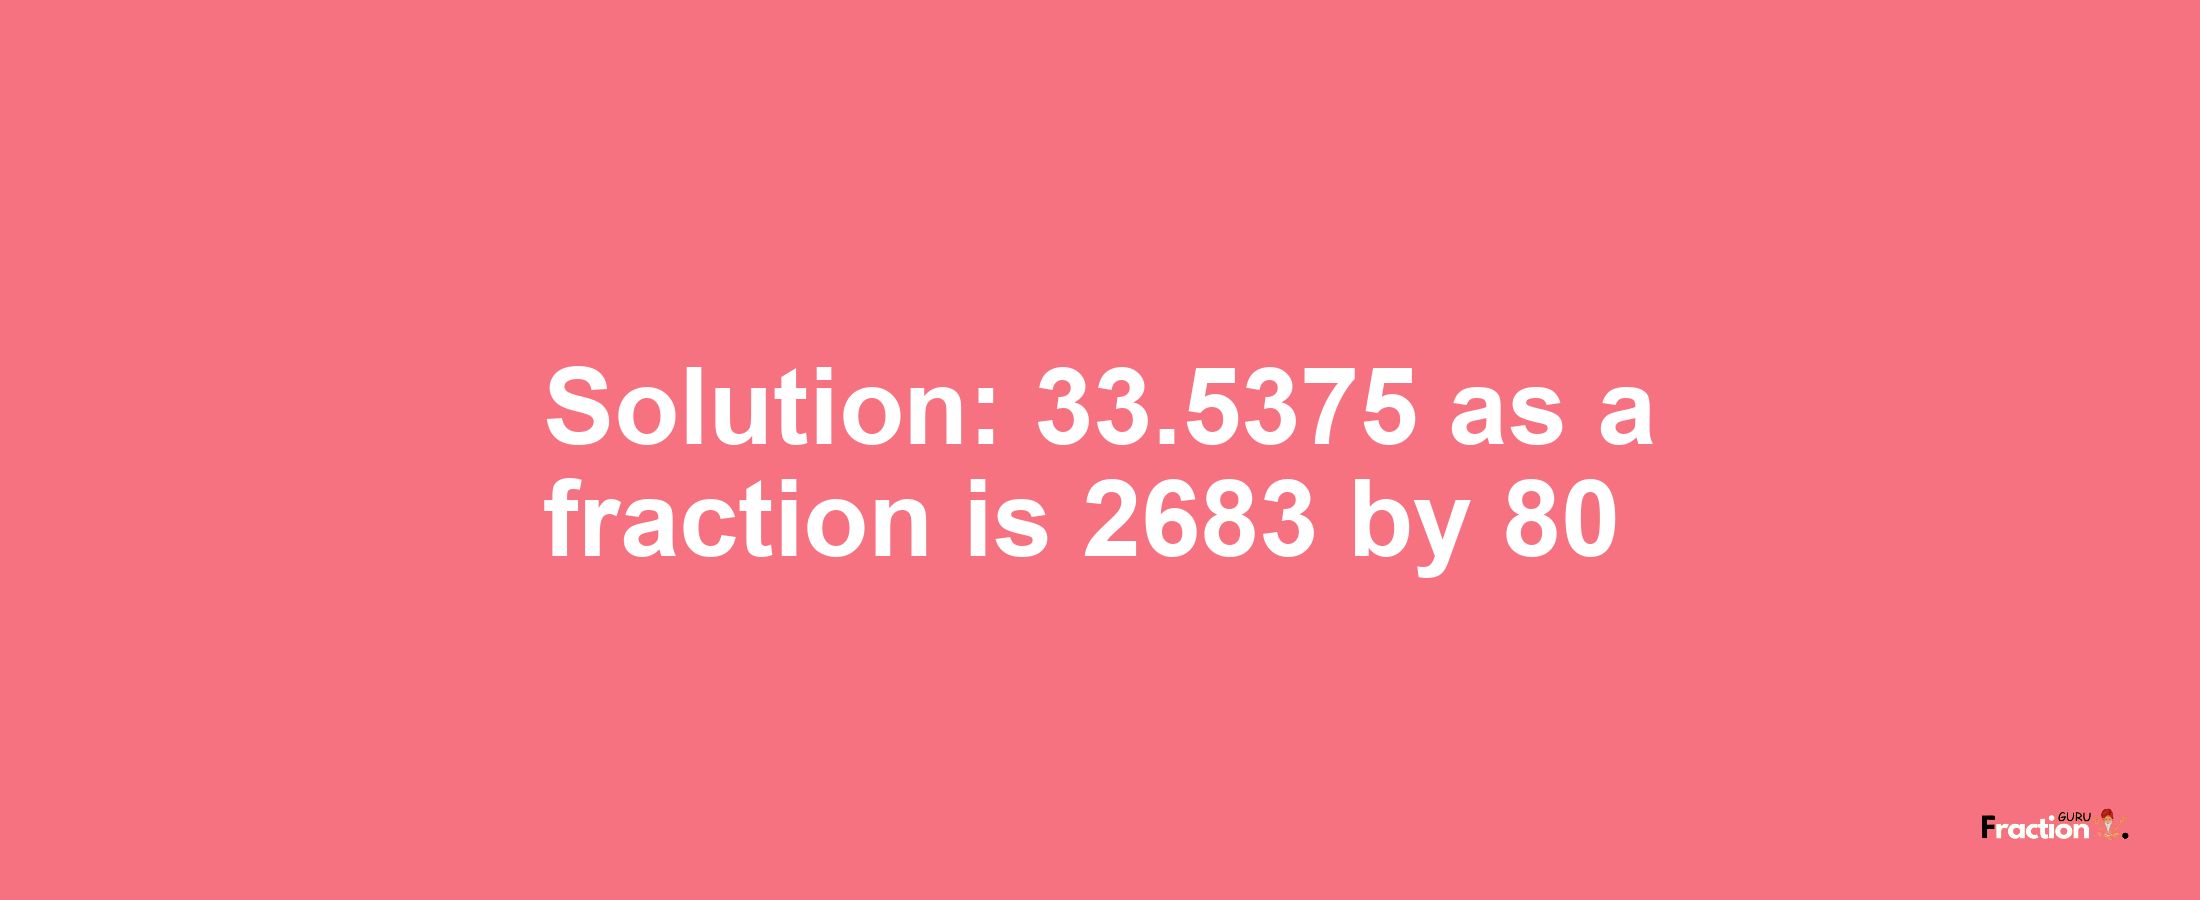 Solution:33.5375 as a fraction is 2683/80